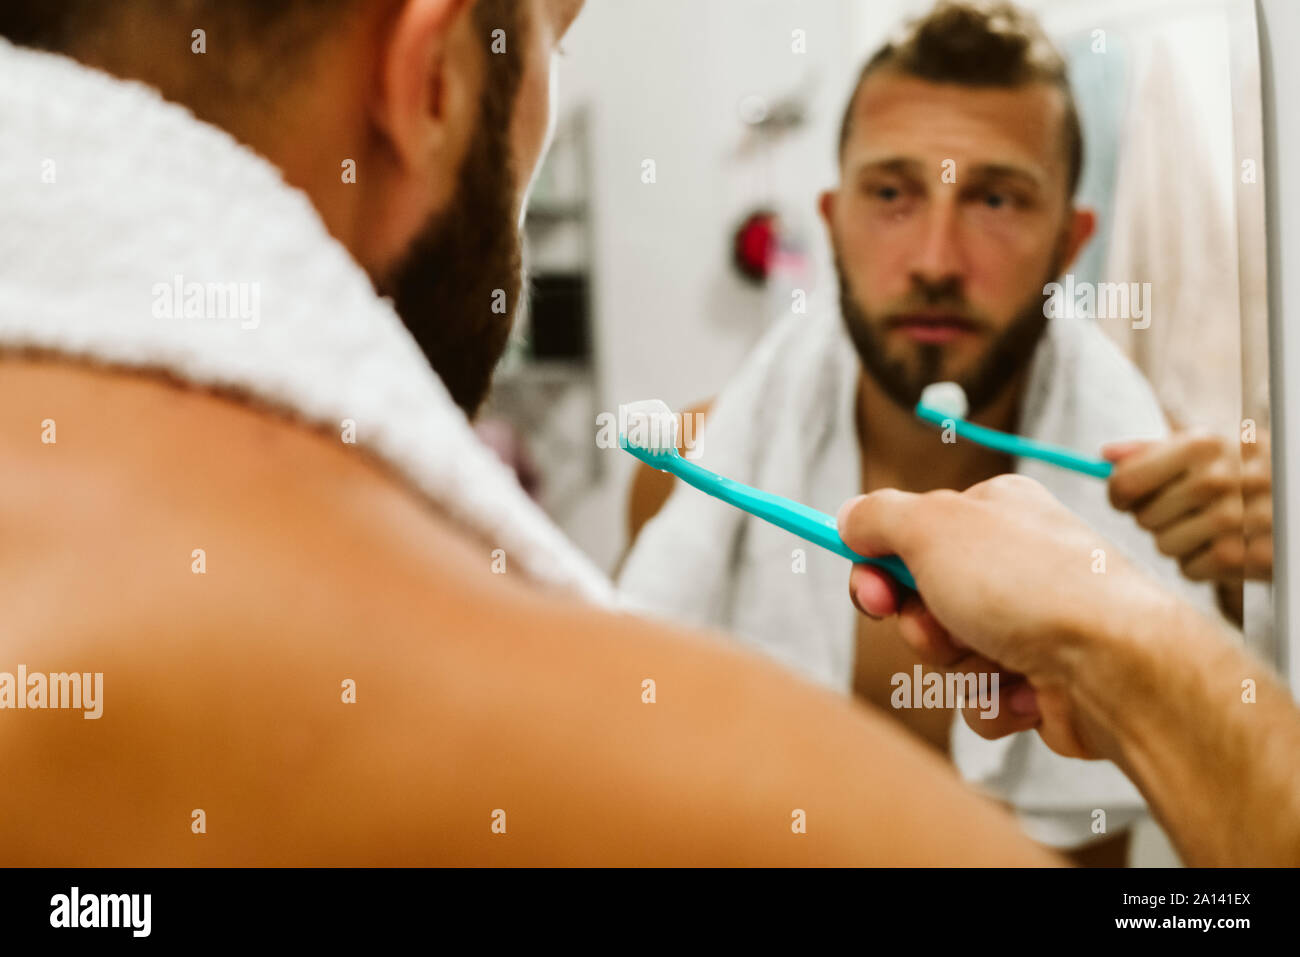 Man with toothbrush cleaning teeth at bathroom Stock Photo